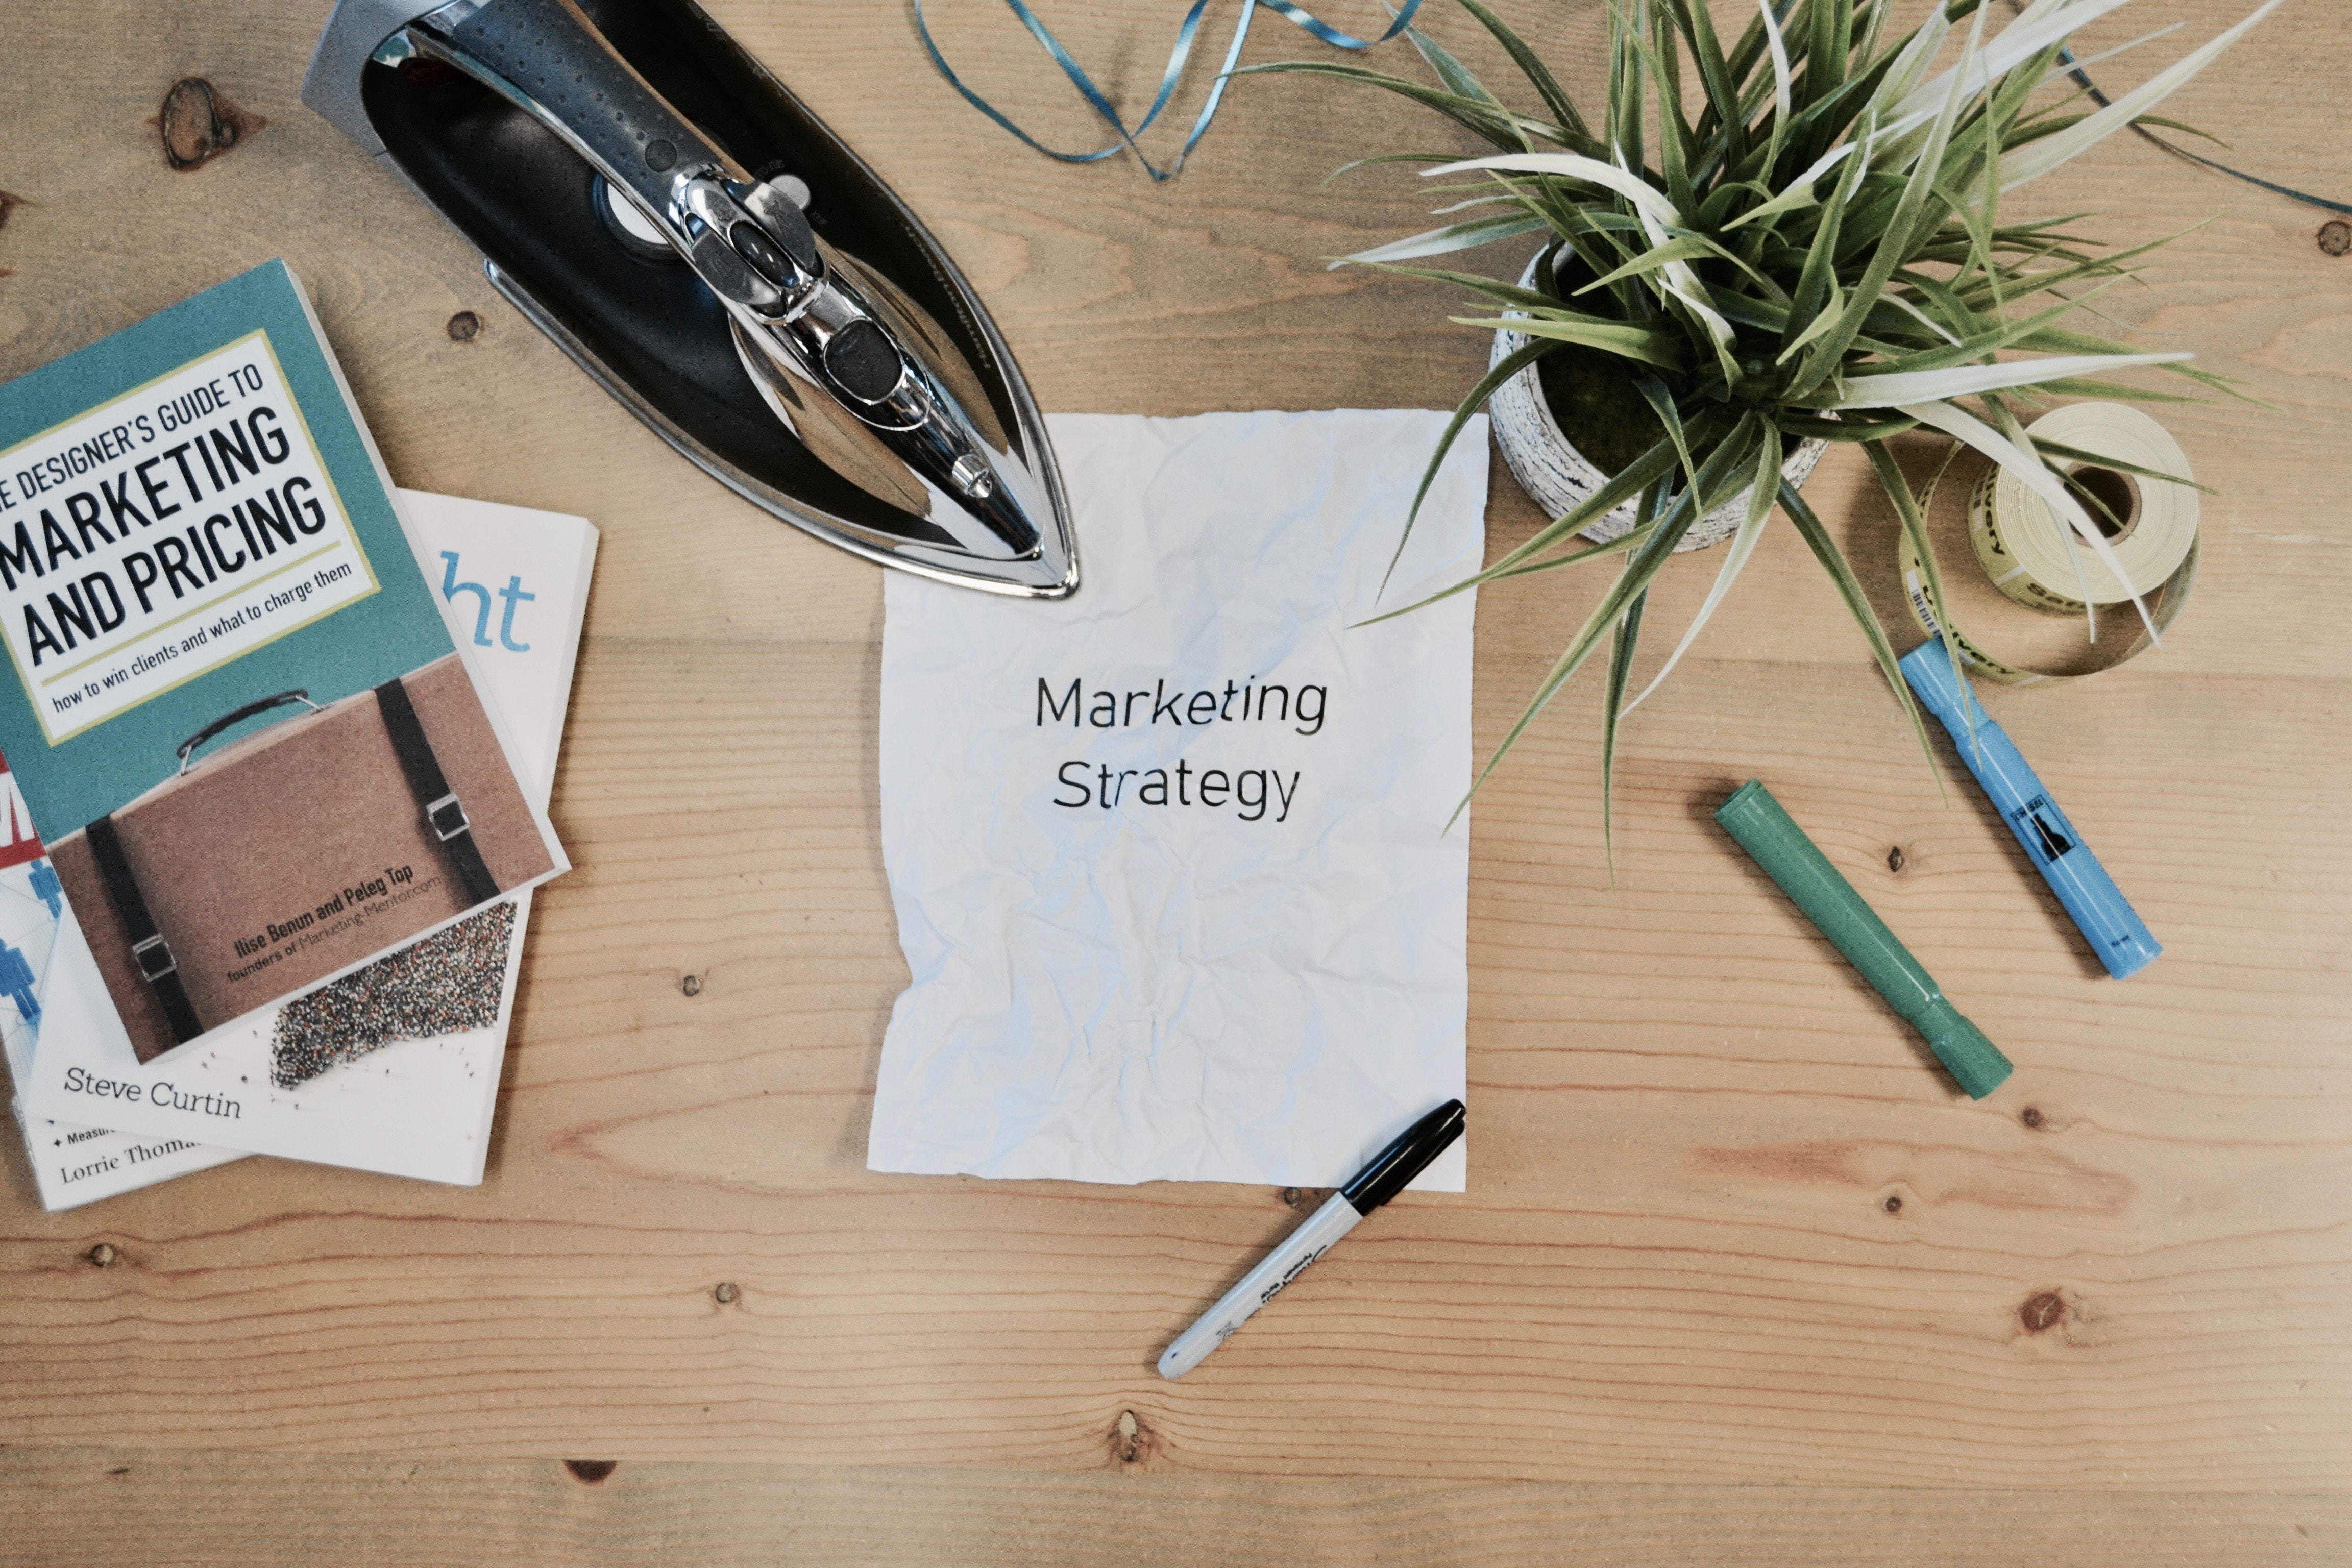 "A table of stationary and decor with a paper that reads Marketing Strategy in the center."